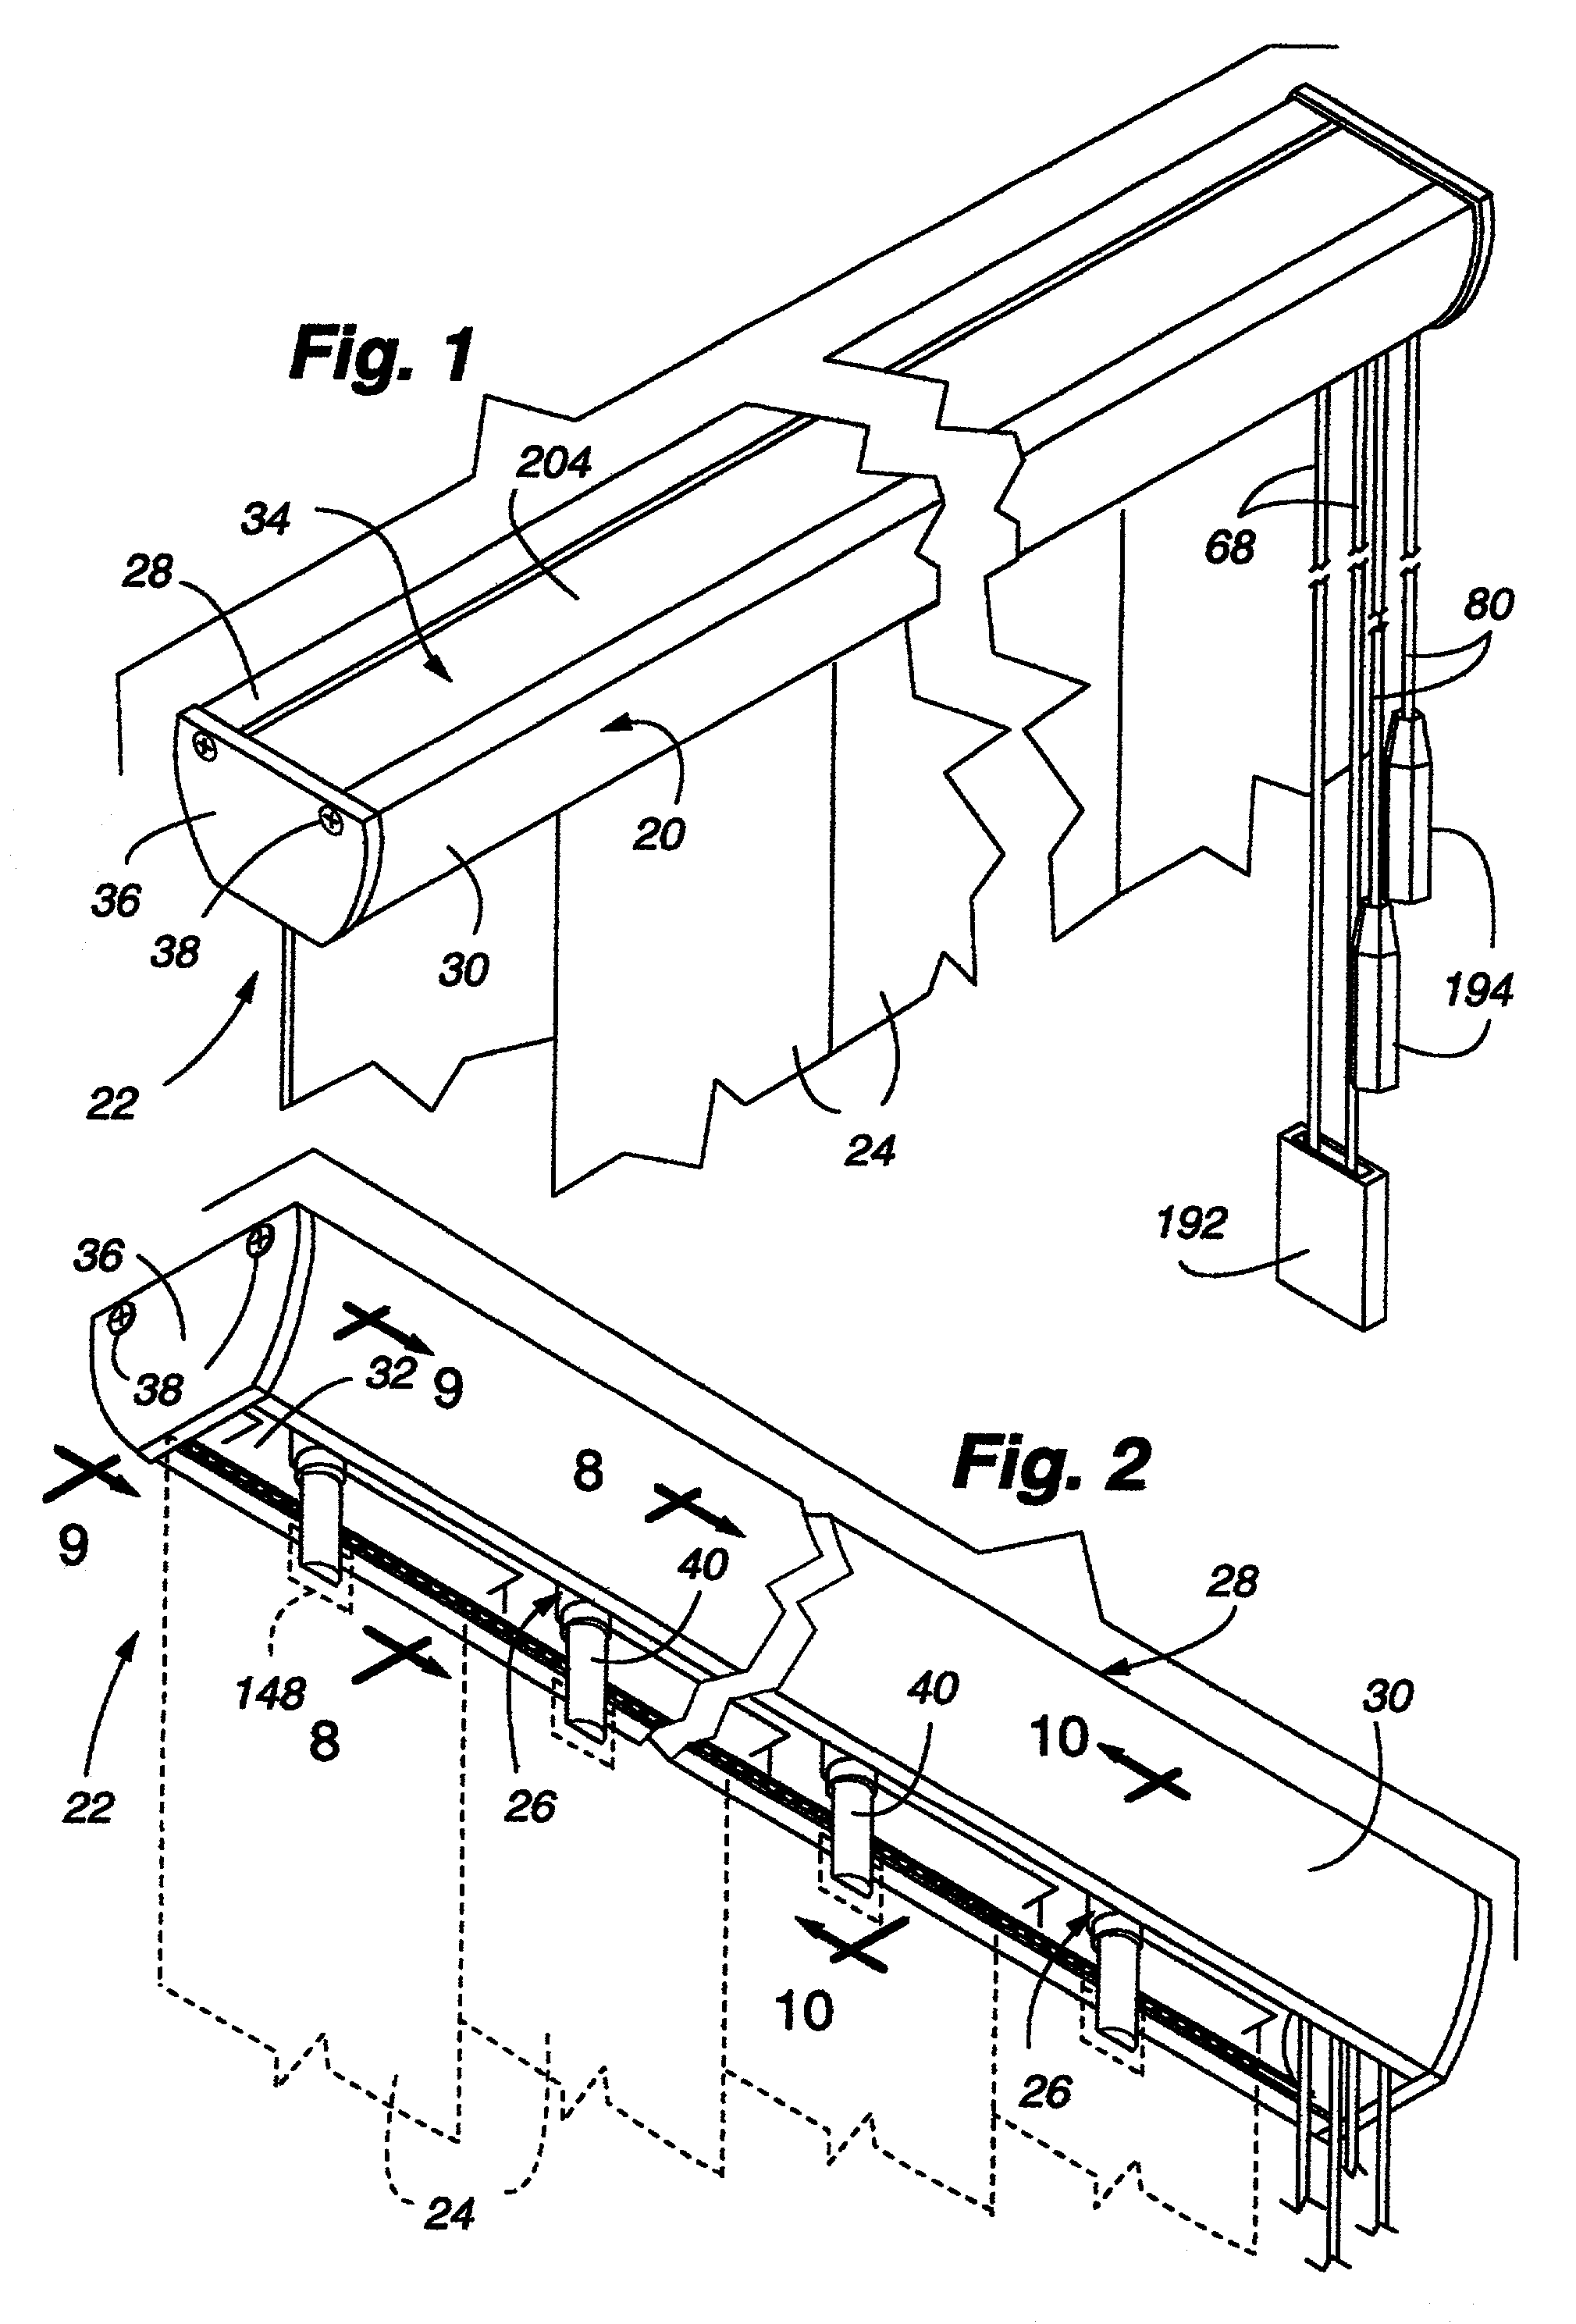 Control system for a vertical vane covering for architectural openings